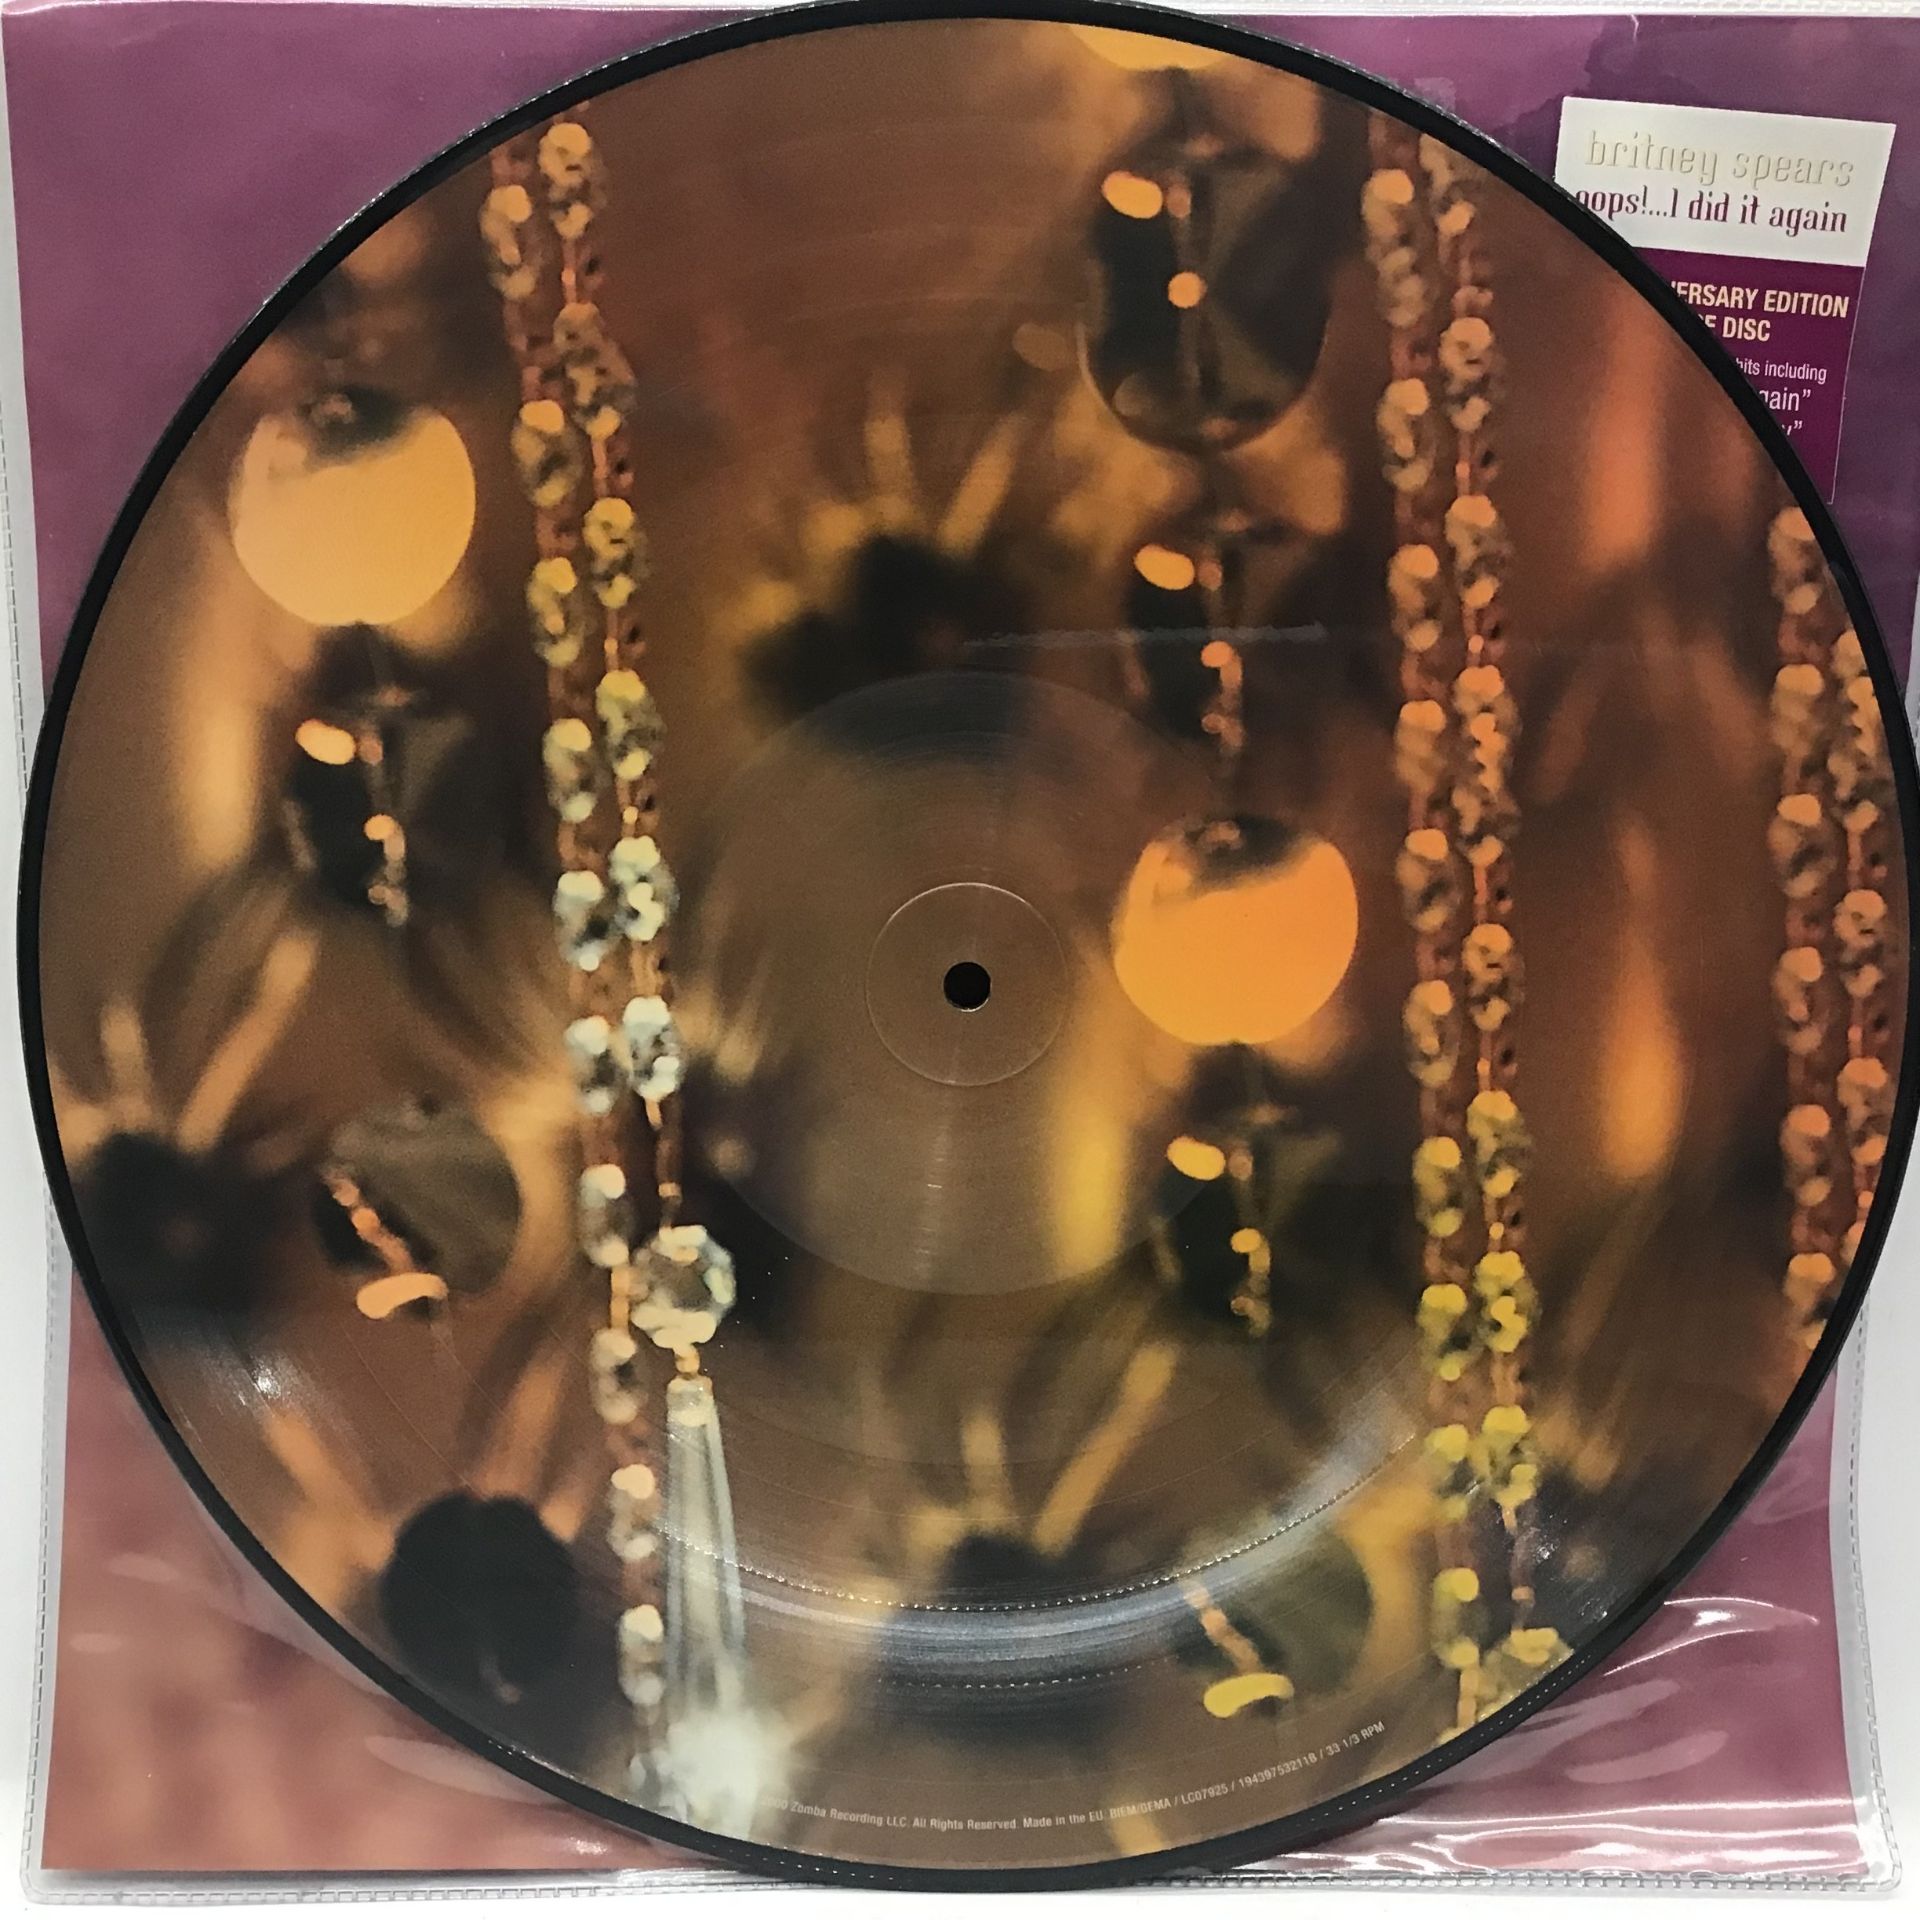 BRITNEY SPEARS ‘OOPS I DID IT AGAIN’ (25th ANNIVERSARY) NEW PICTURE DISC VINYL LP RECORD. Found here - Image 3 of 3